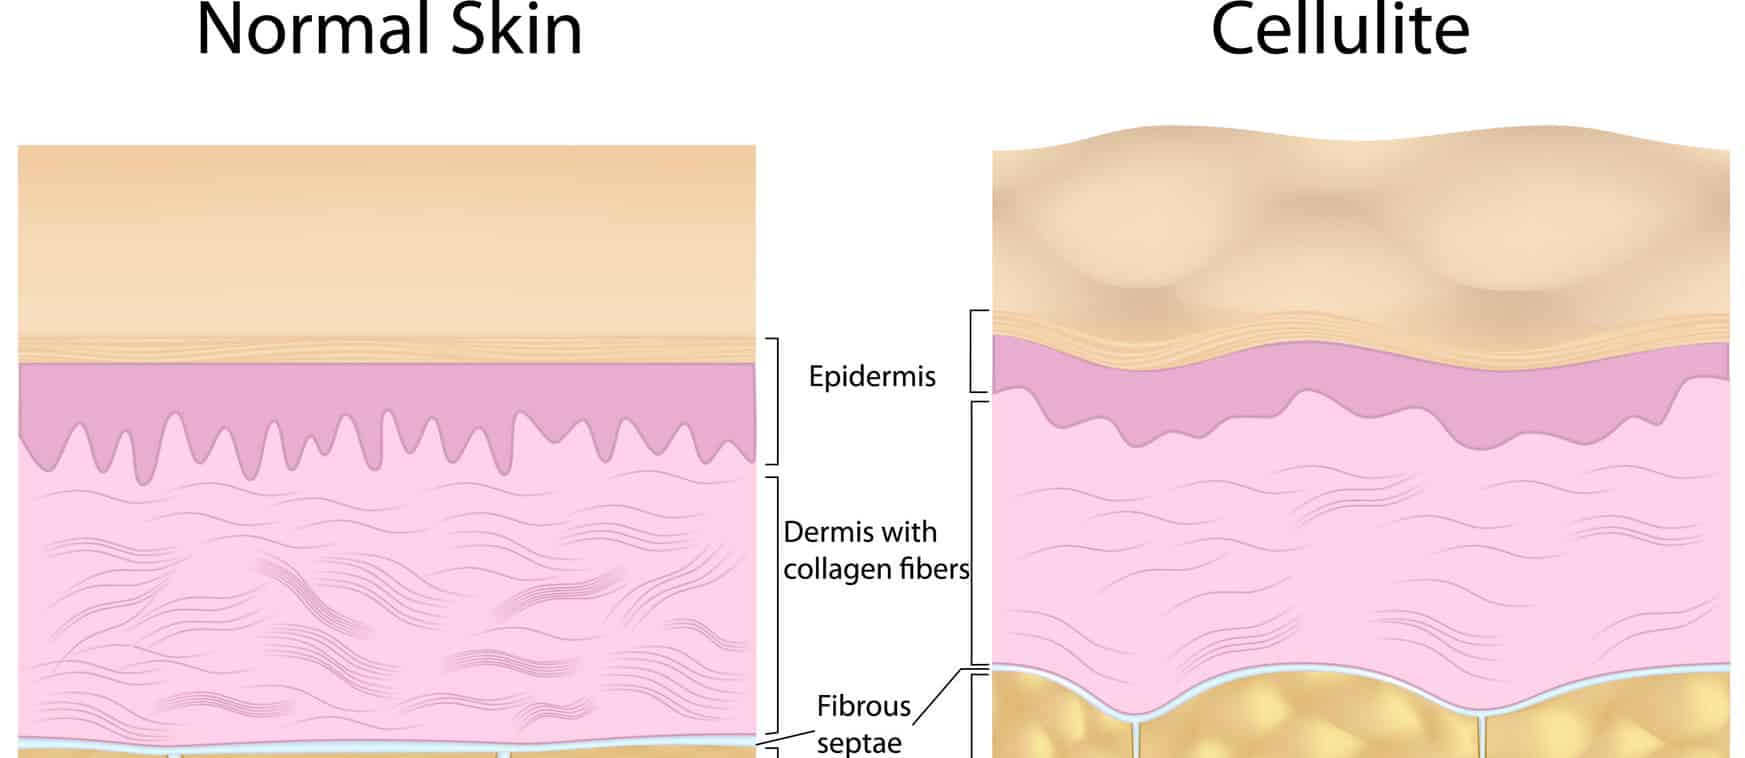 Can Cellulite Be Treated With Diet?